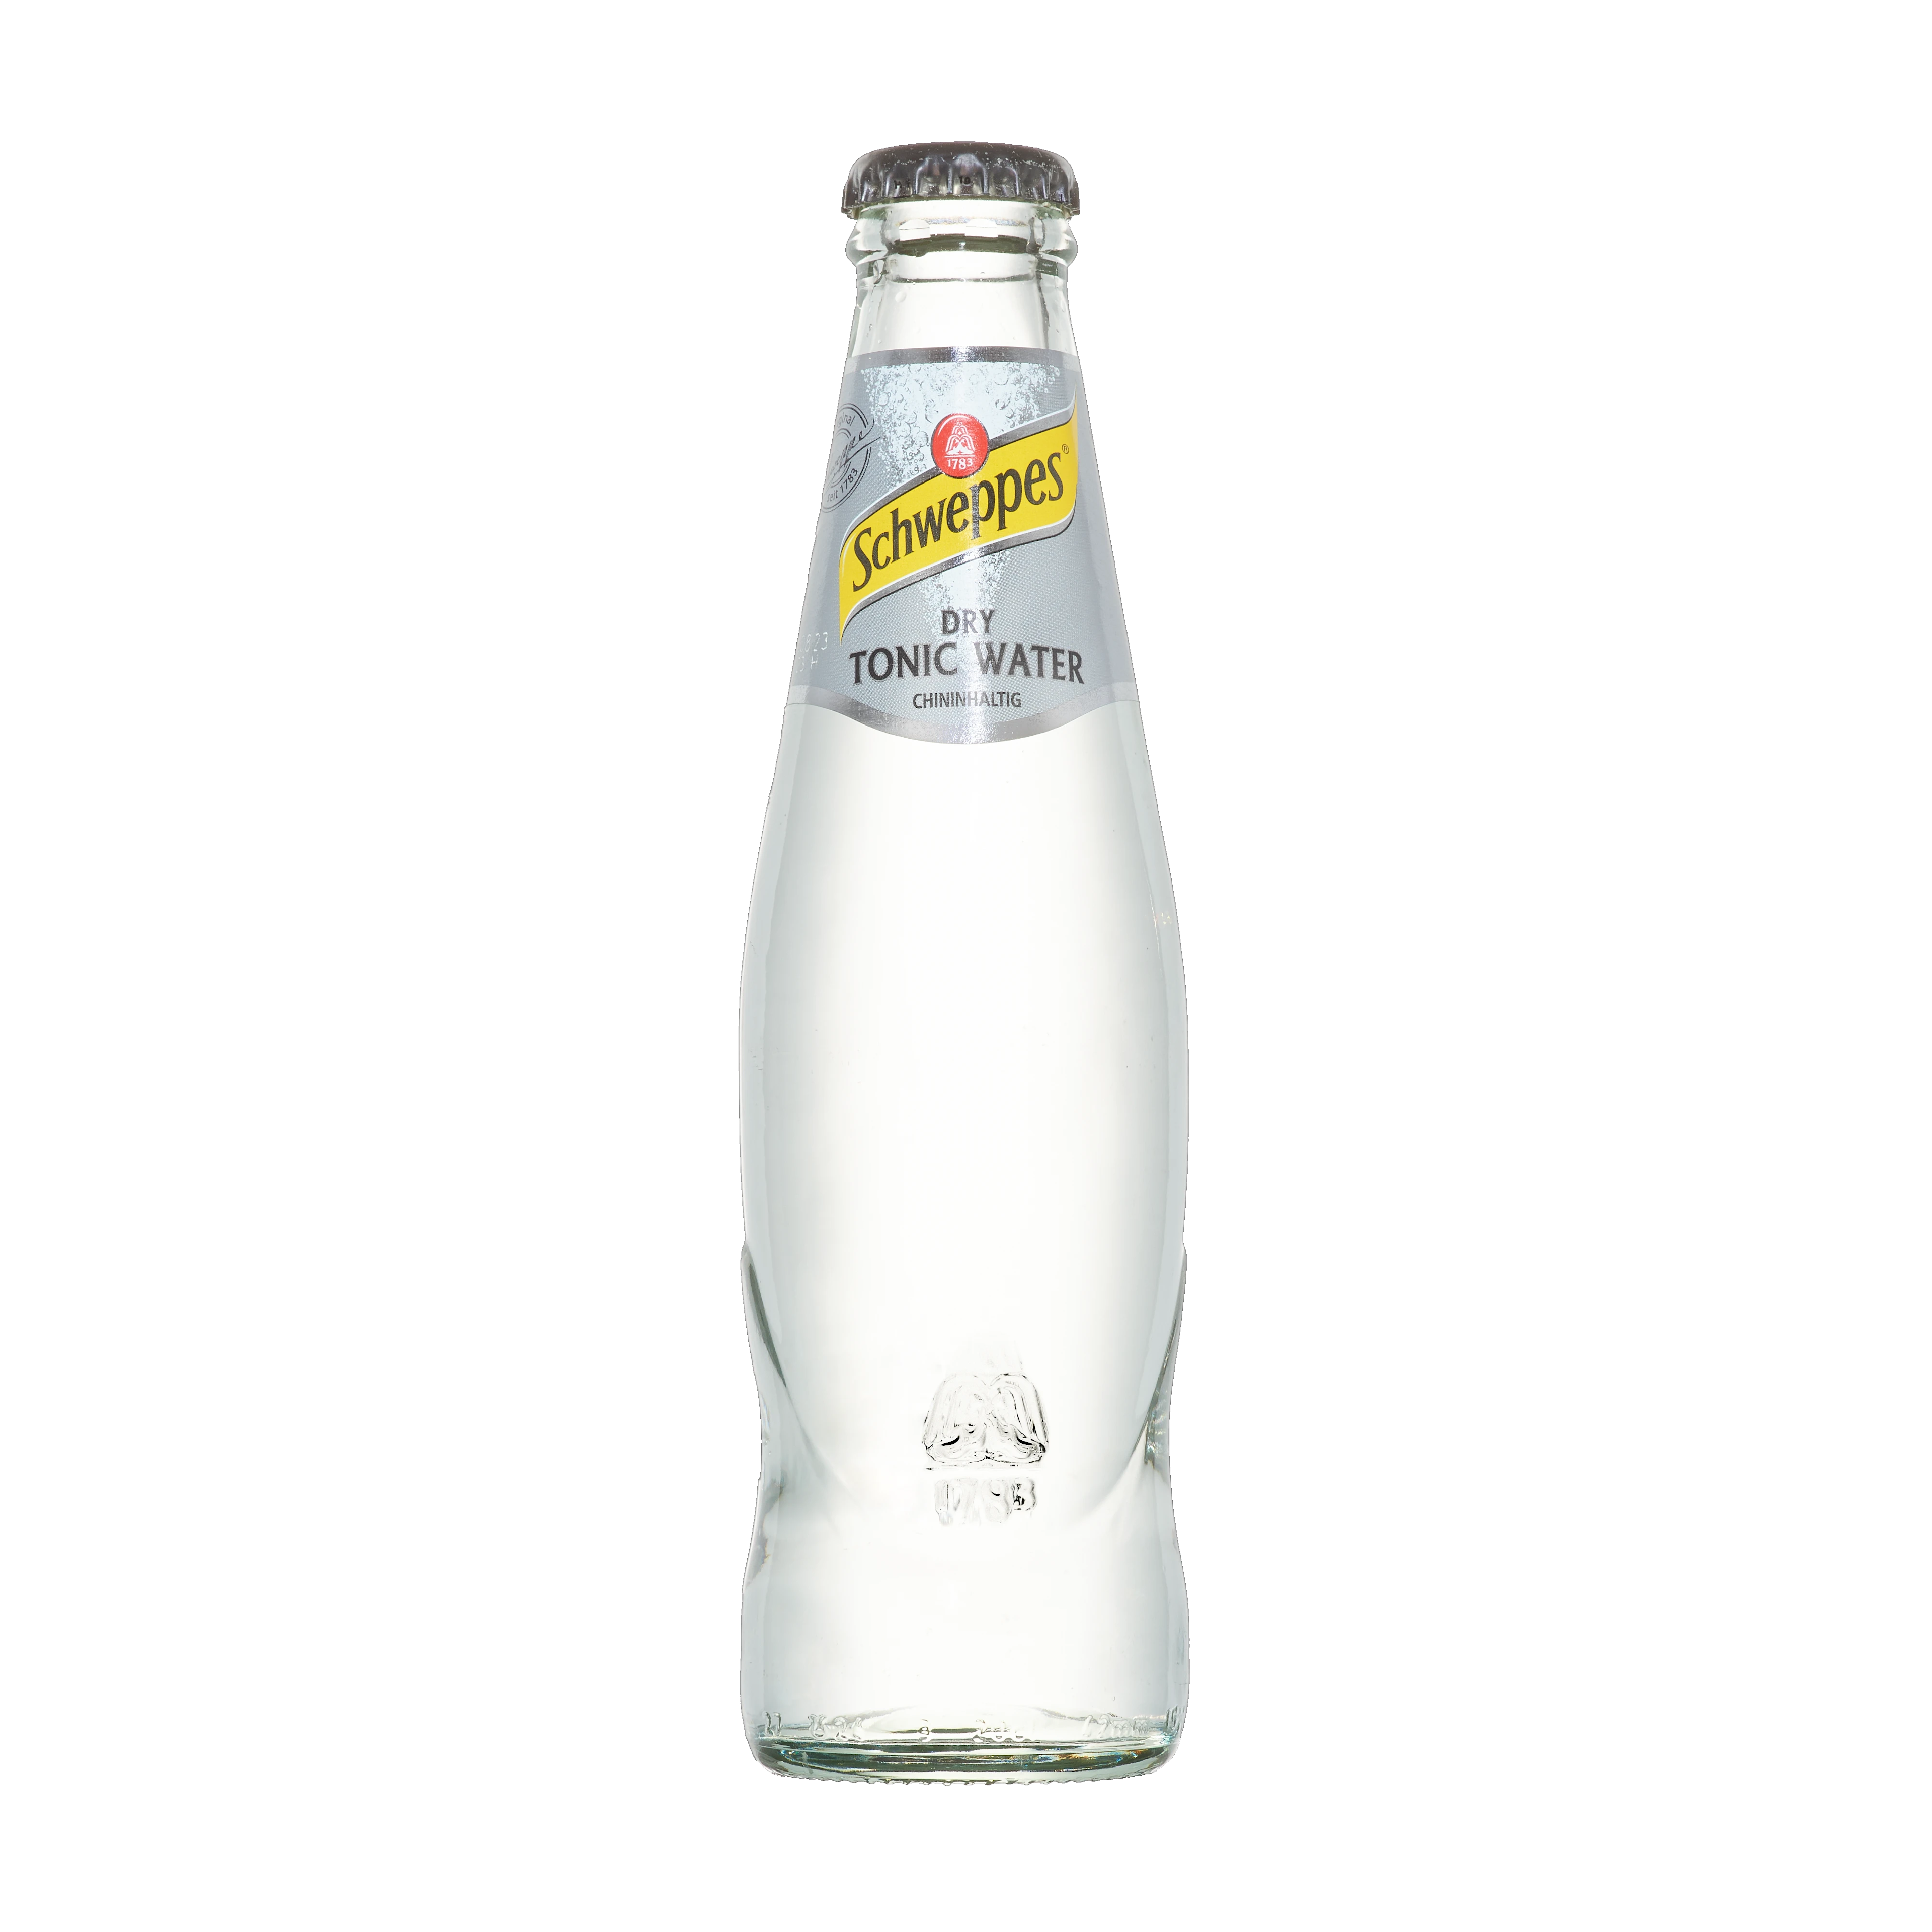 Schweppes Dry Tonic Water 